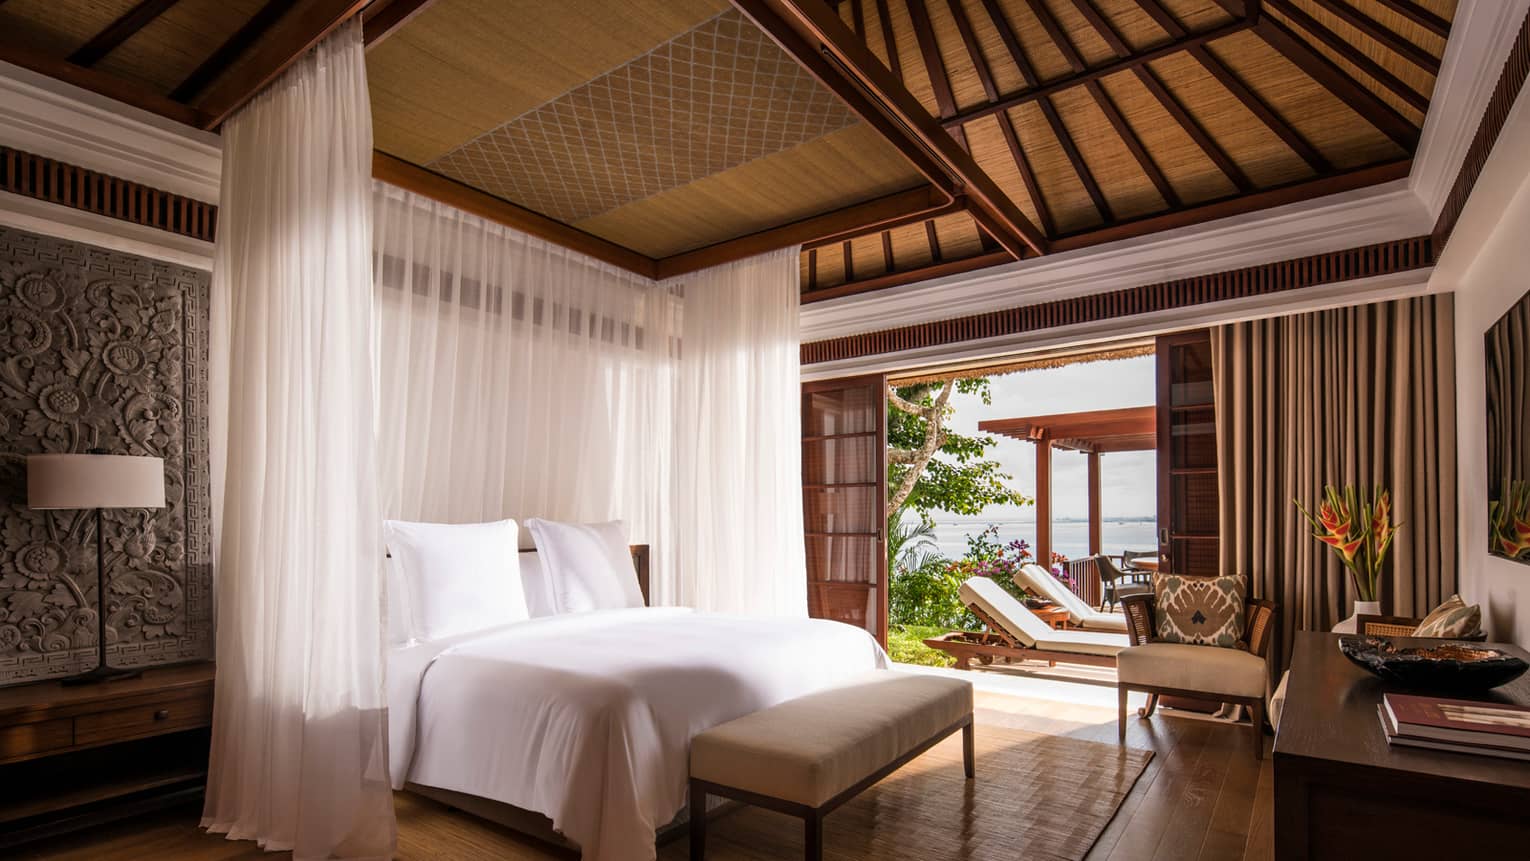 Villa bed with sheer white curtains hanging around each side, Balinese textiles on wall, door open to sunny patio